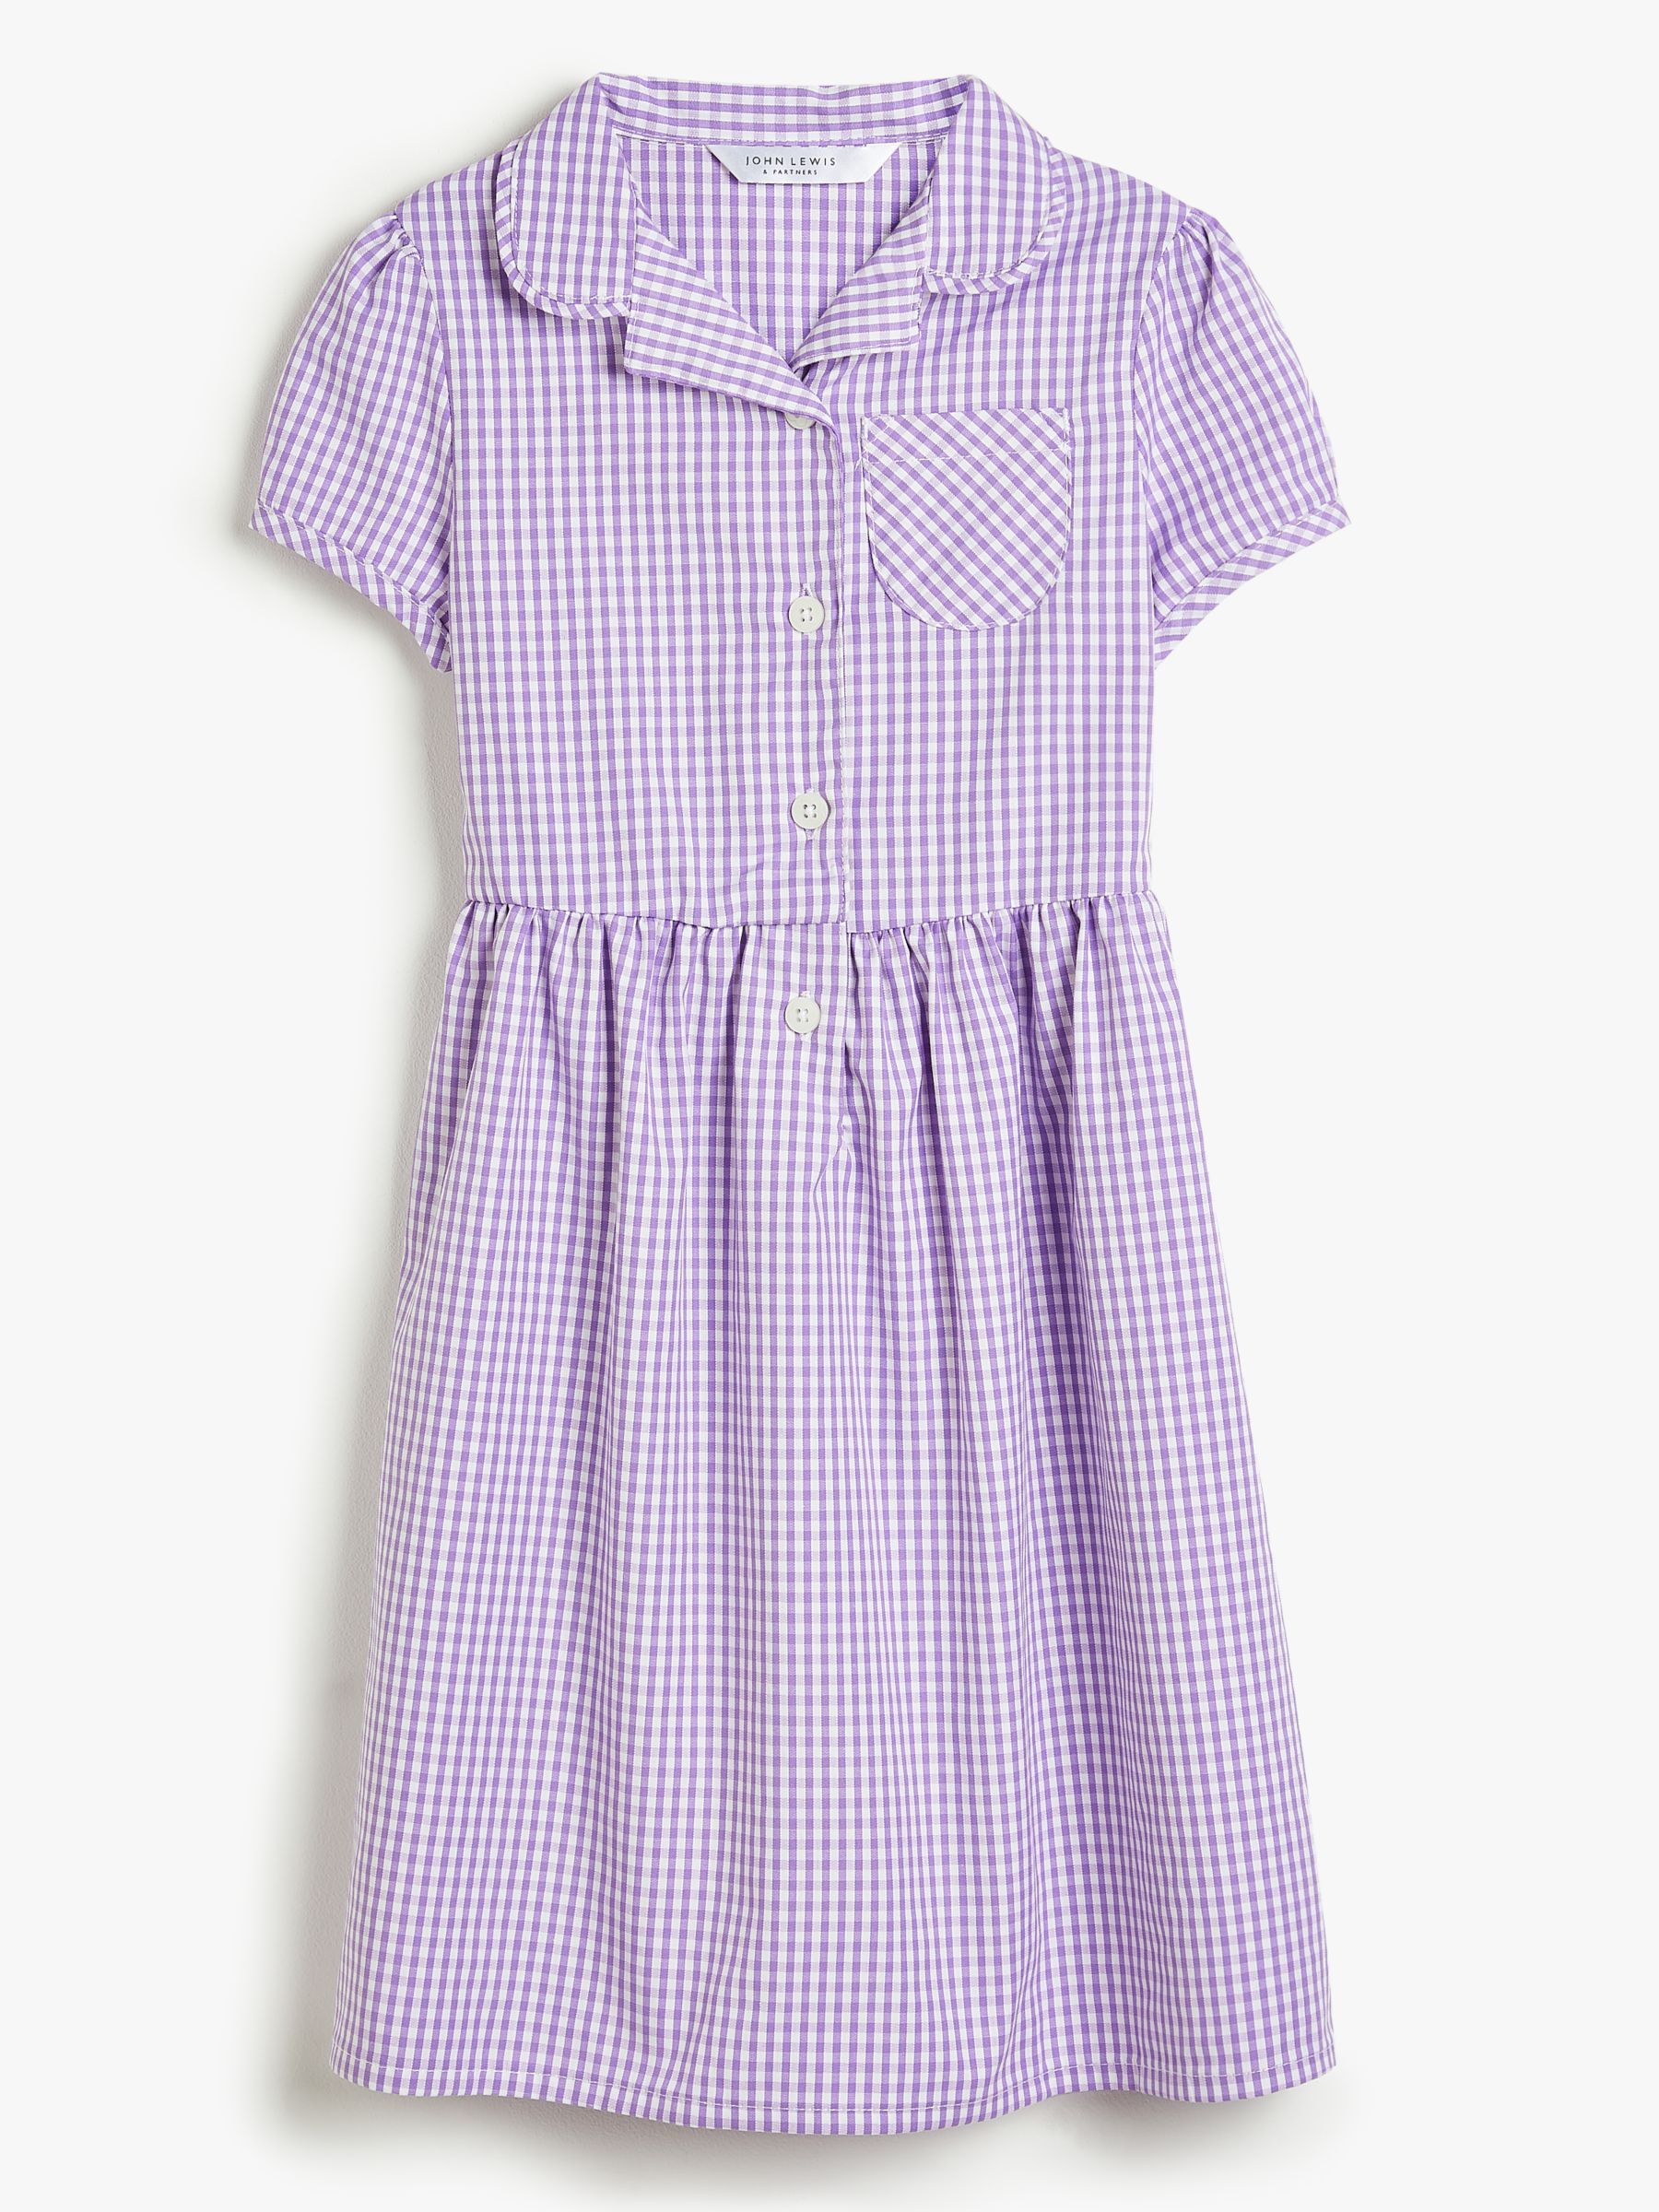 John Lewis School Belted Gingham Checked Summer Dress, Lilac, 7 years